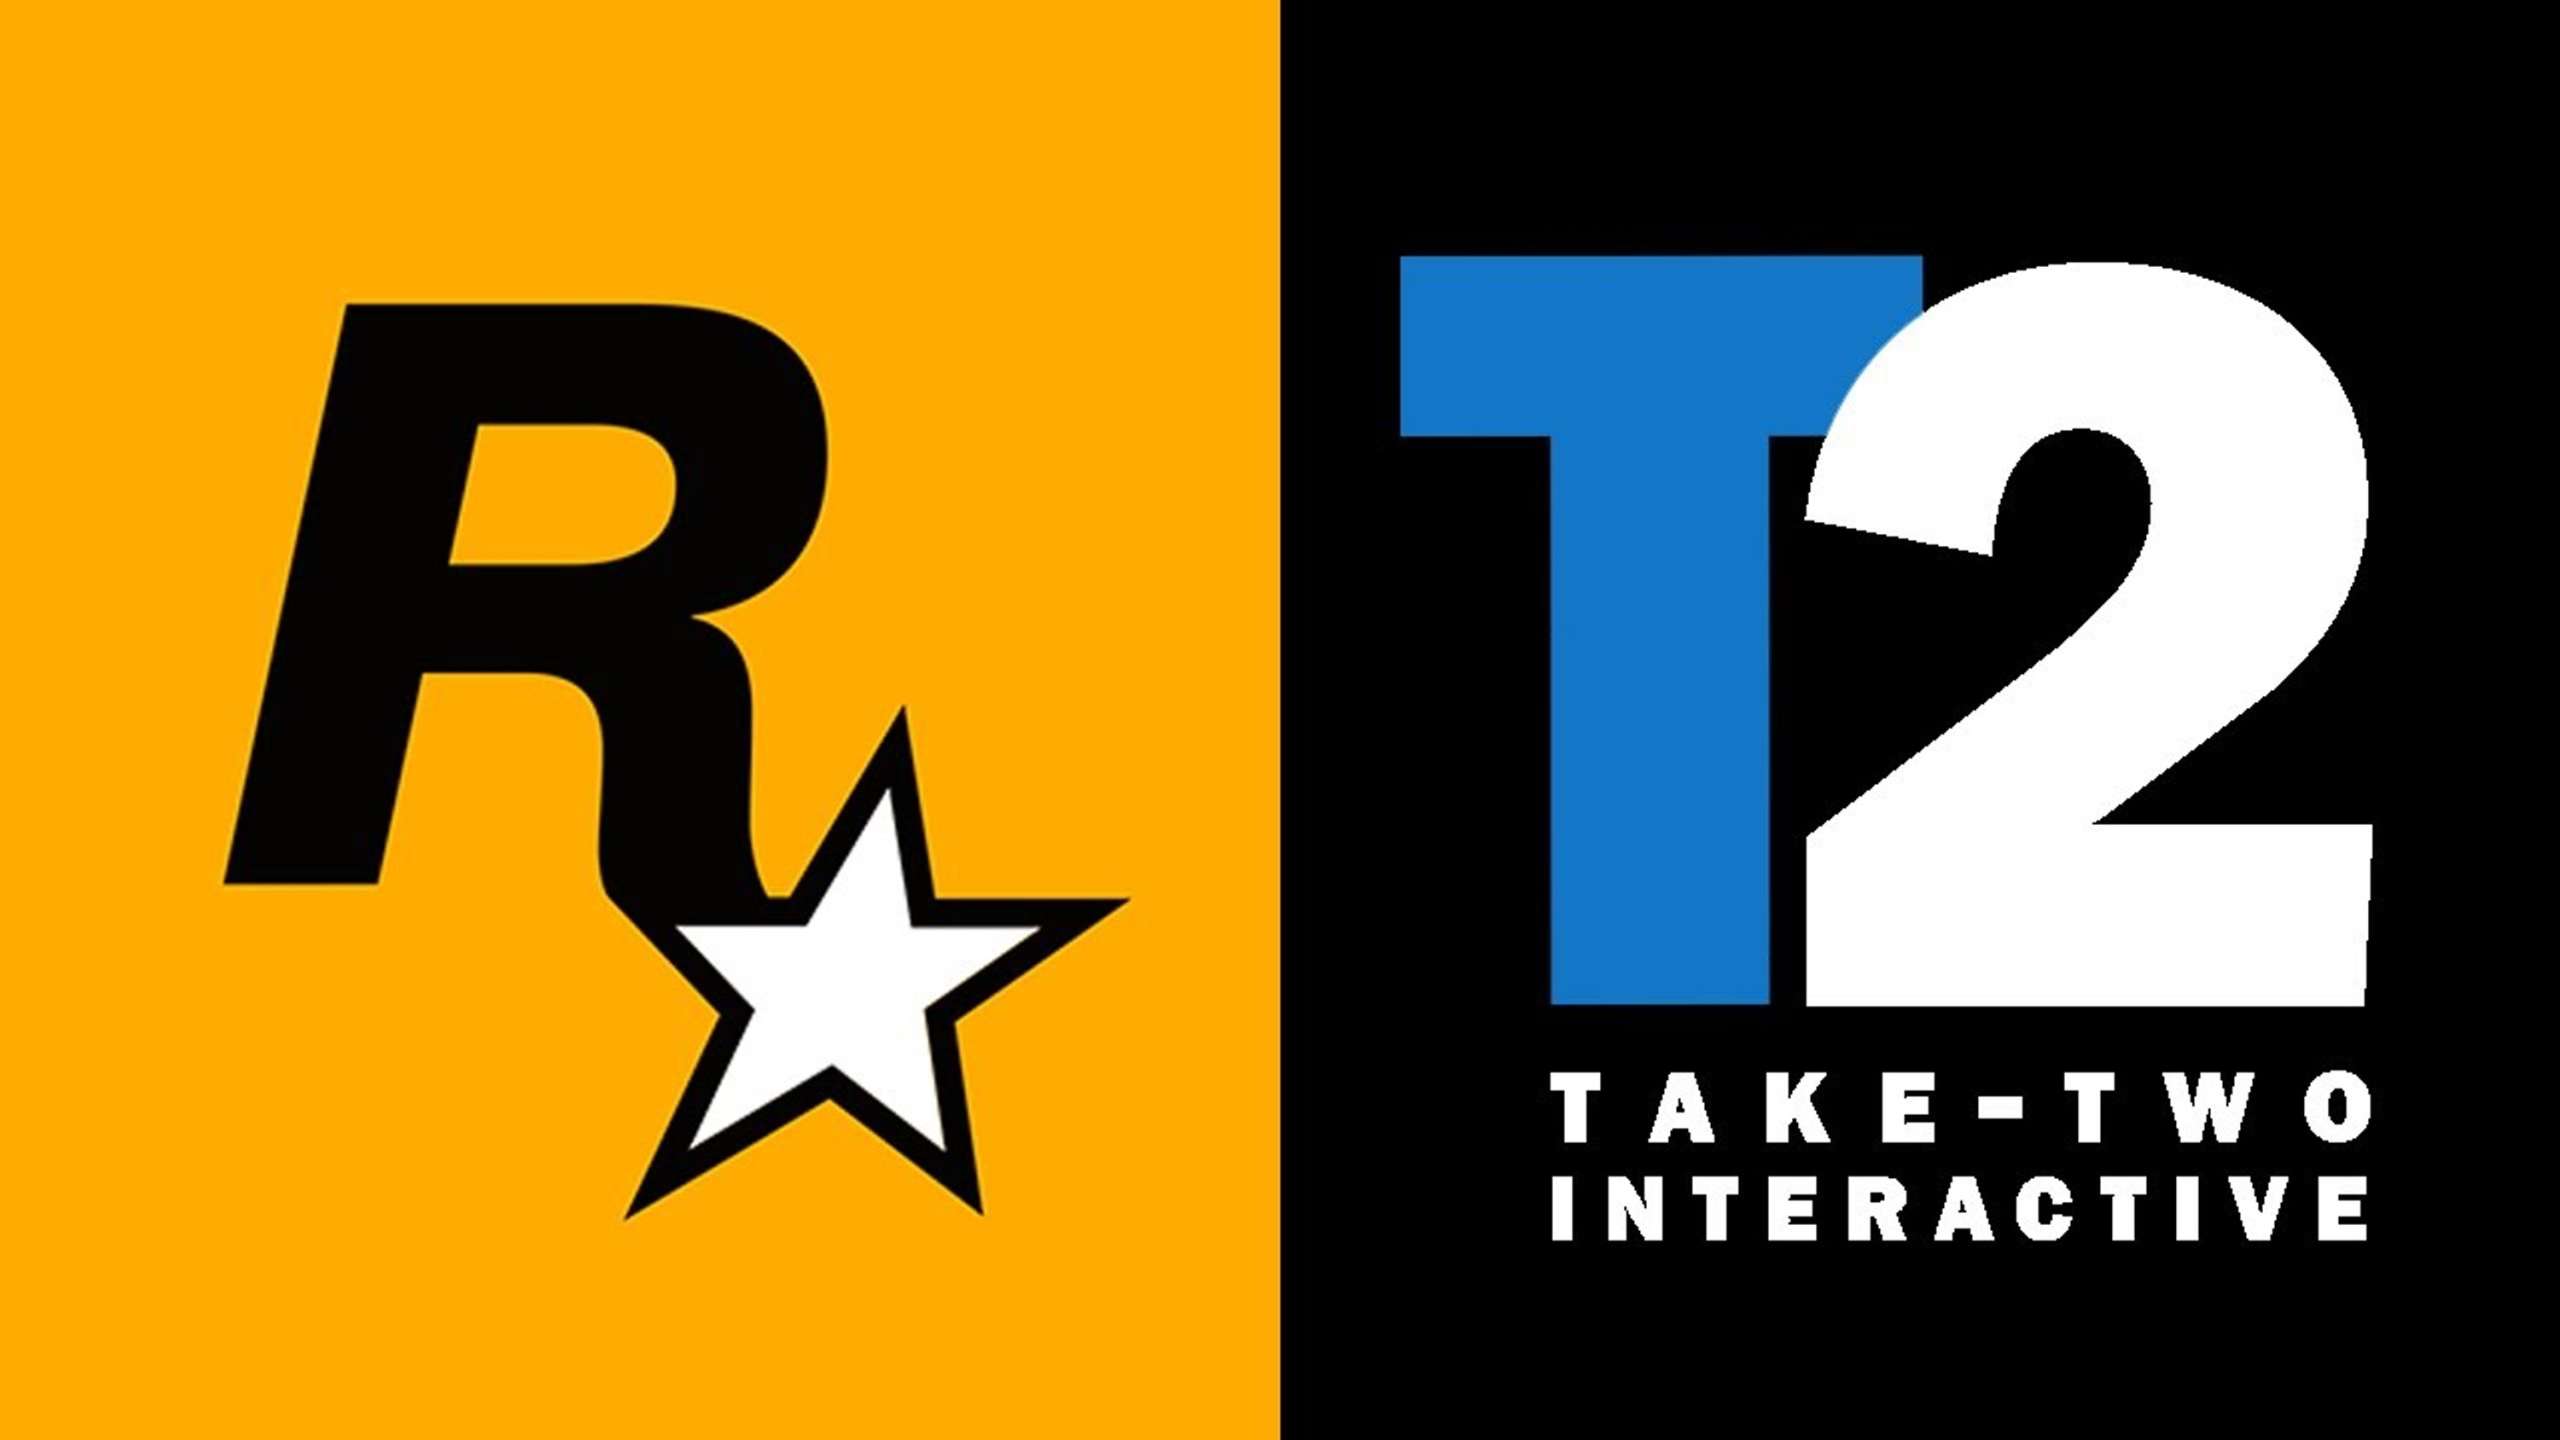 After Roe v. Wade Was Overturned, Take-Two Interactive, The Publisher Of Grand Theft Auto And Red Dead Redemption, Declared Its Continued Support For Its Staff